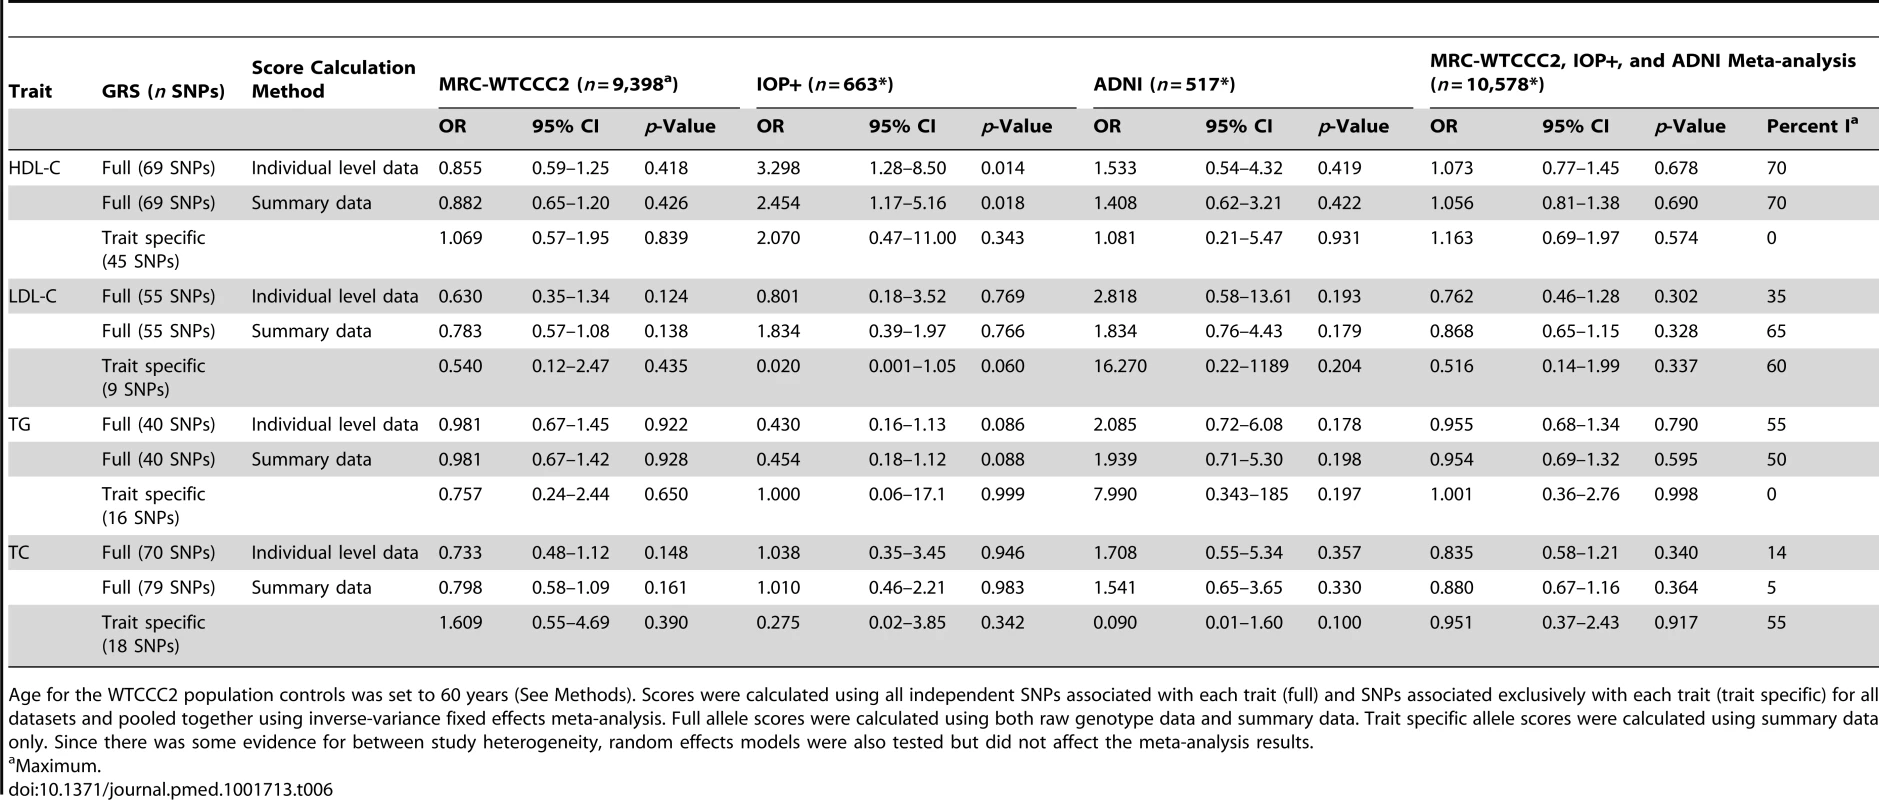 Association of lipid genotype risk scores with LOAD per one unit increase in lipid levels after controlling for age at baseline visit, number of APOE e4 alleles, and gender.